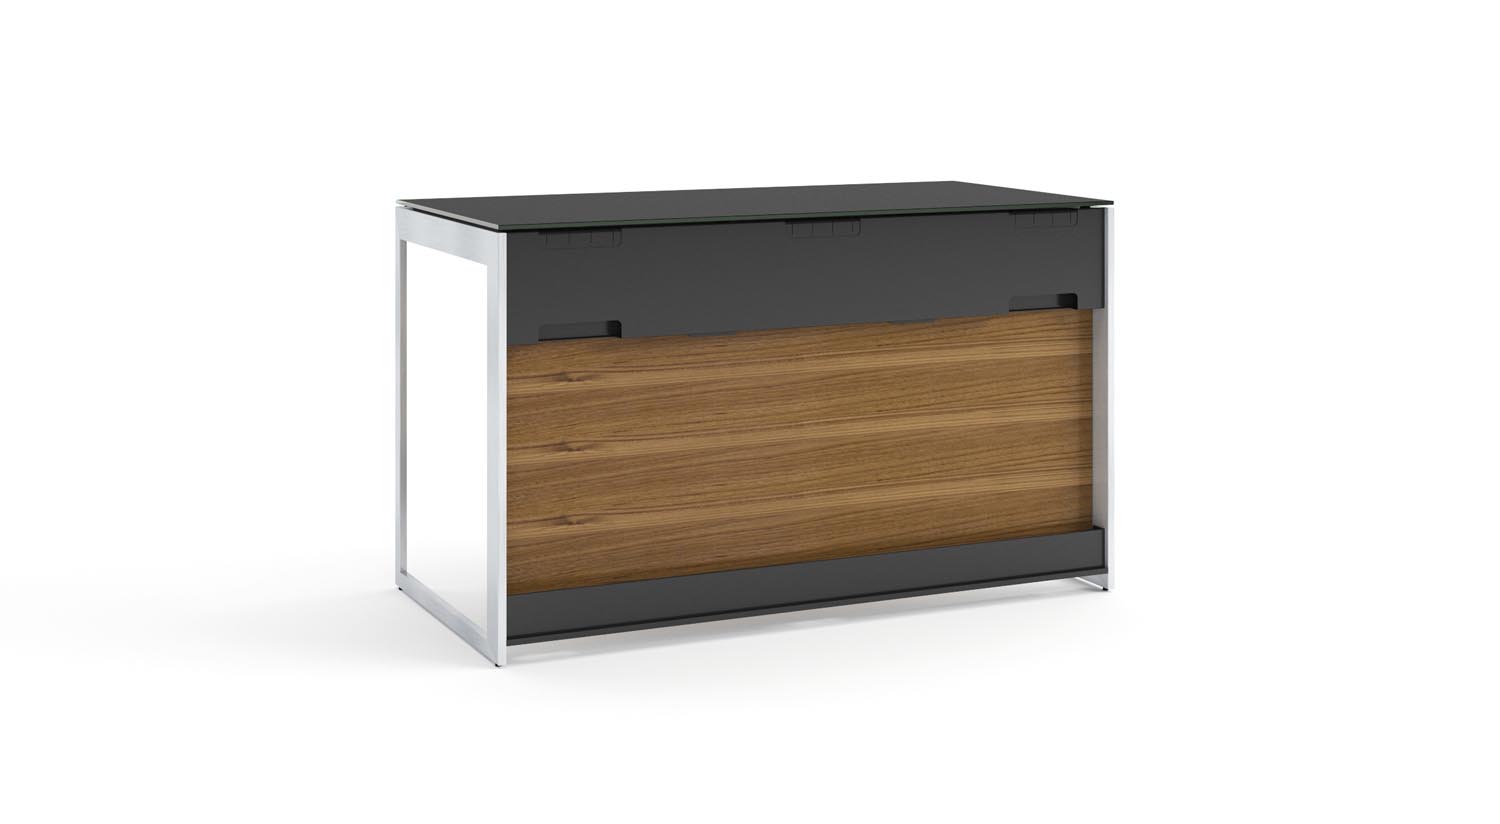 Sequel 20 L Shaped Office Desk by BDI • room service 360°